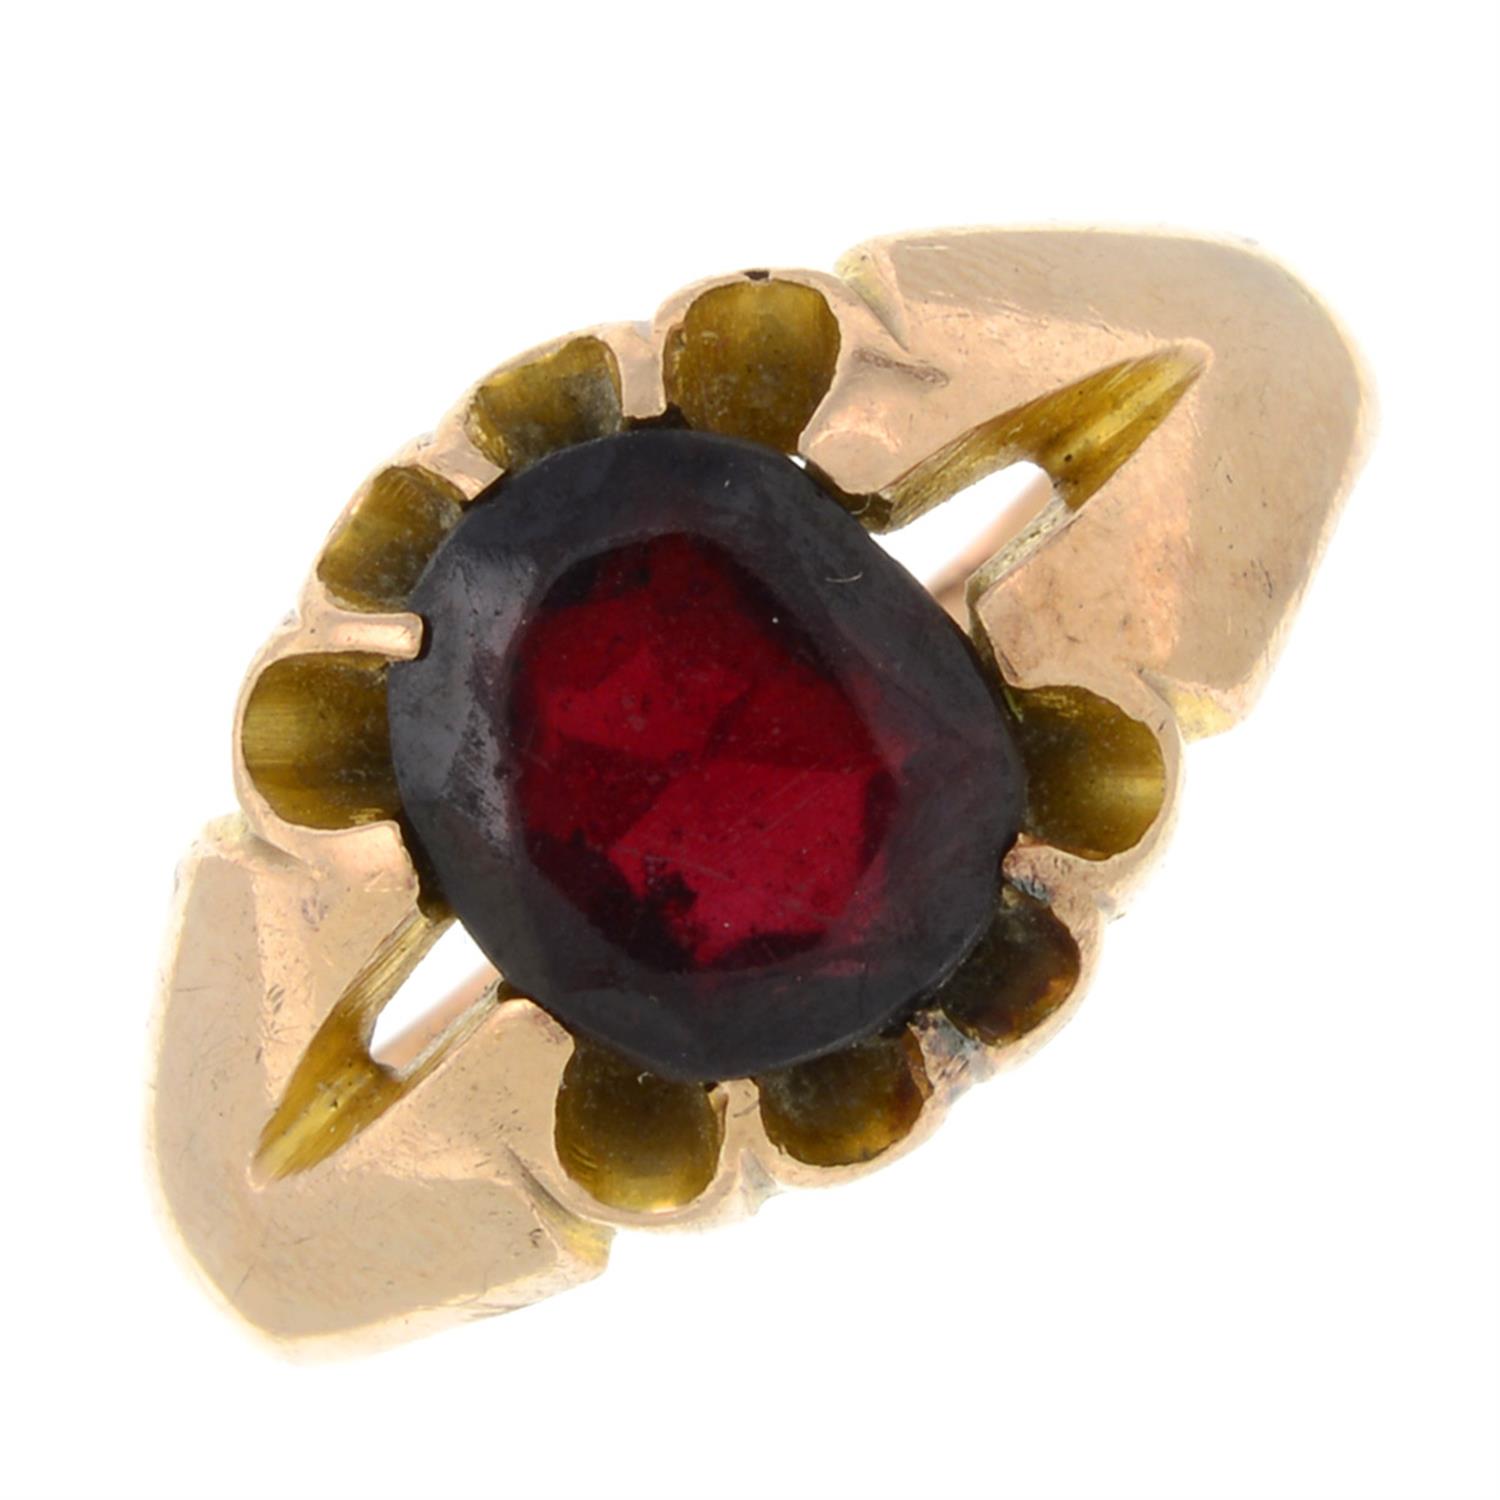 An early 20th century 9ct gold garnet single-stone ring.